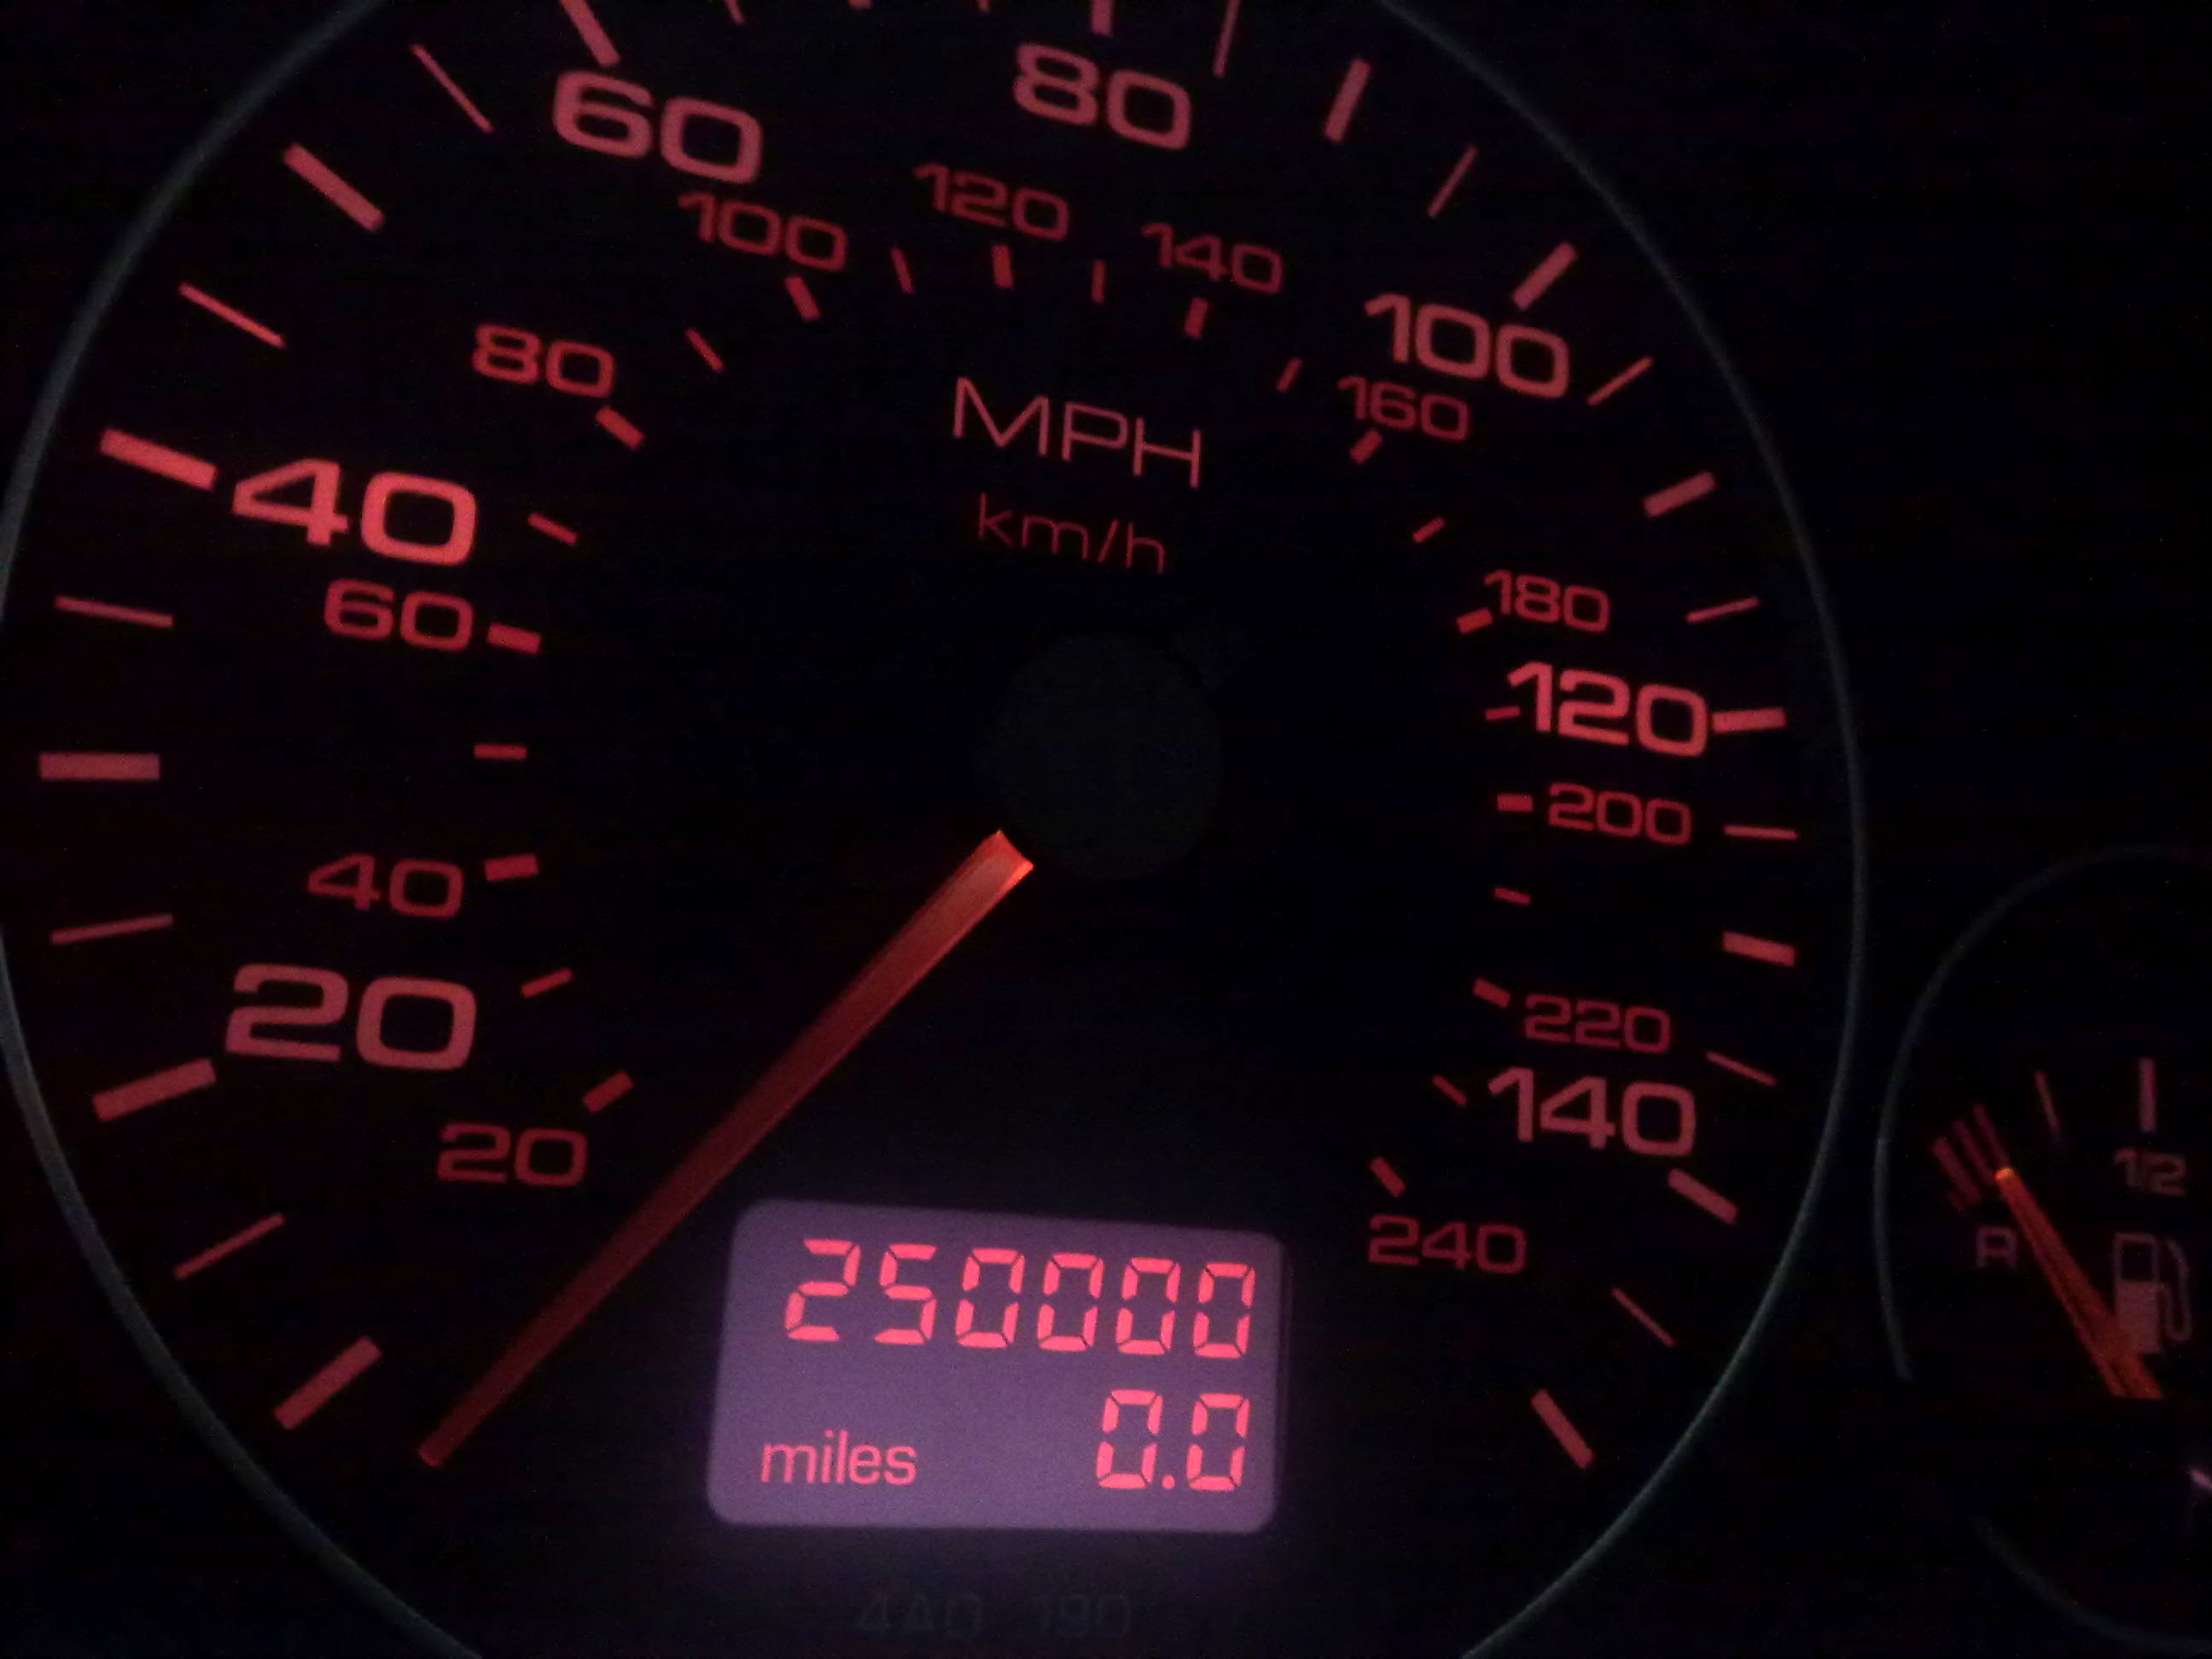 250000 Miles! 

My 1996 A6 Avant 1.8 20v covered 250000 miles this morning. I look forward to seeing this figure on our A2! :-)